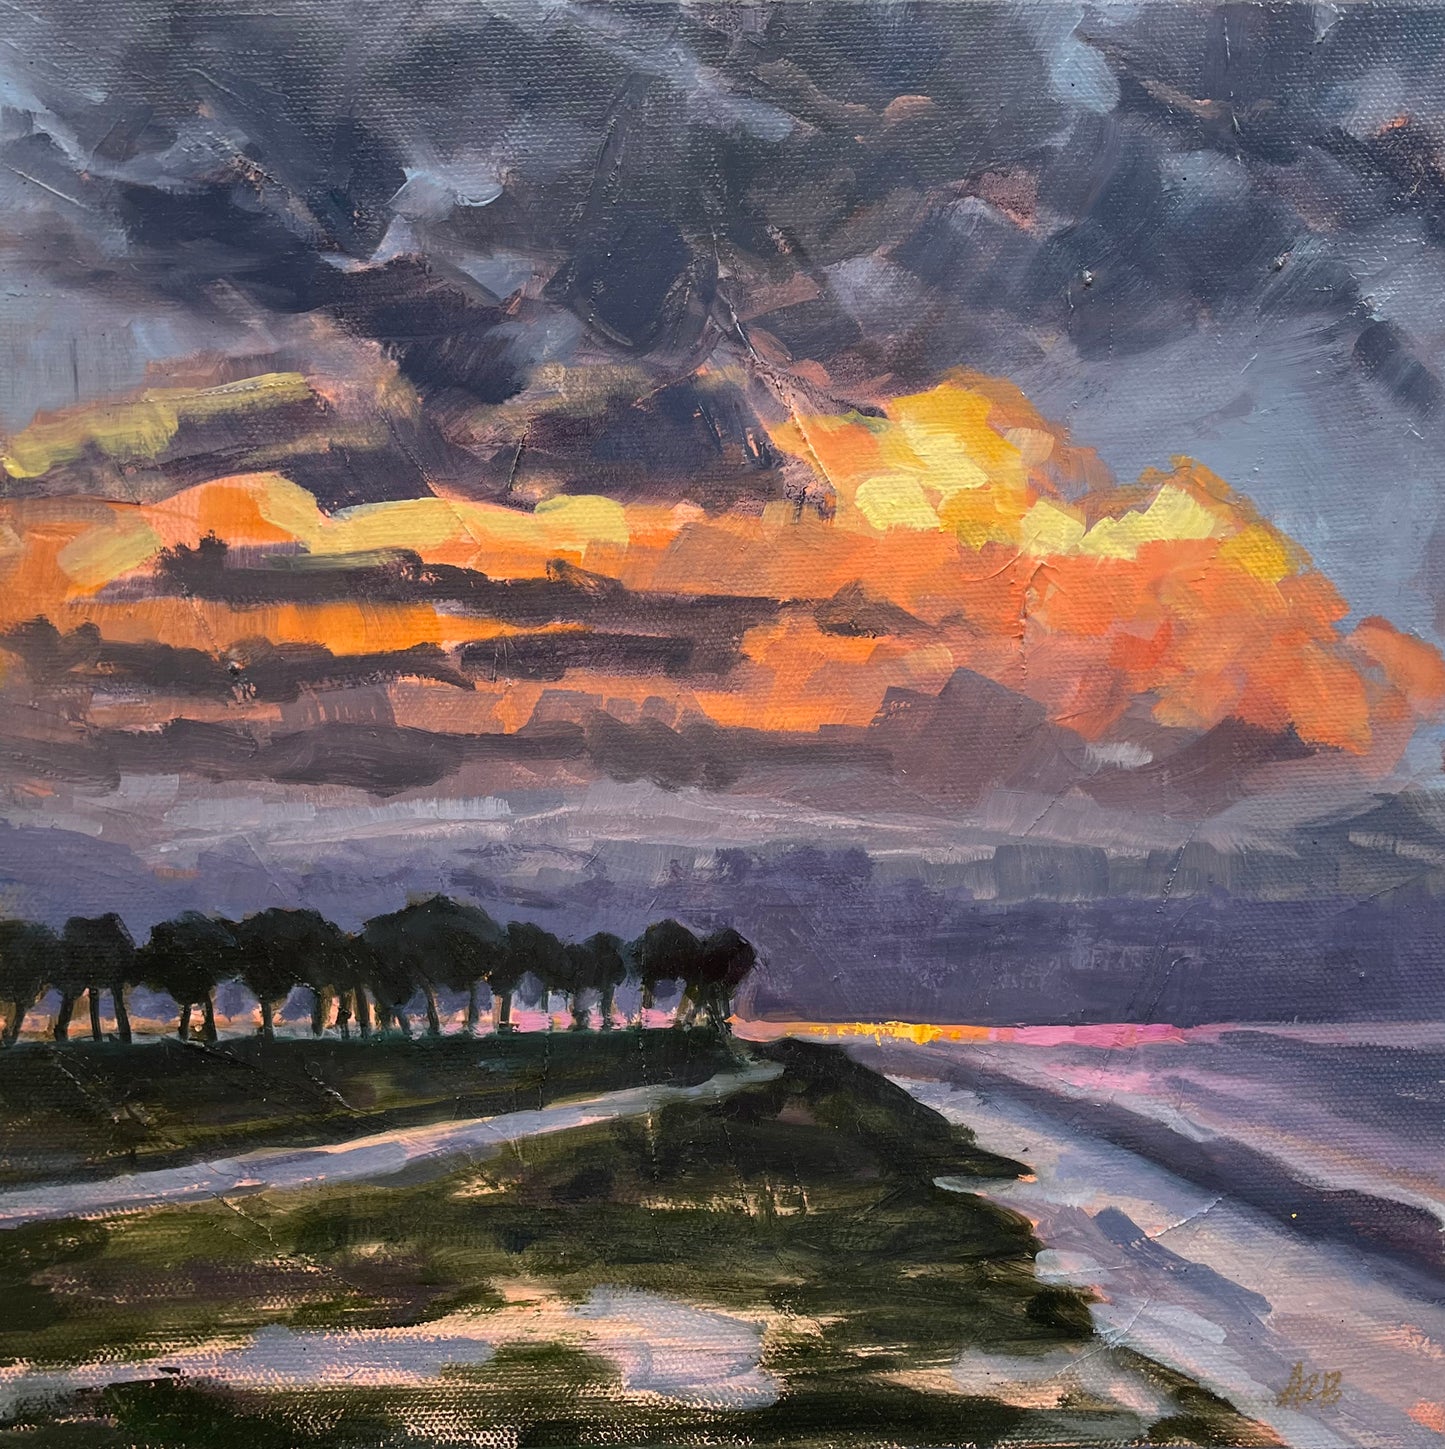 Sunset over the Palms, 12x12 inches